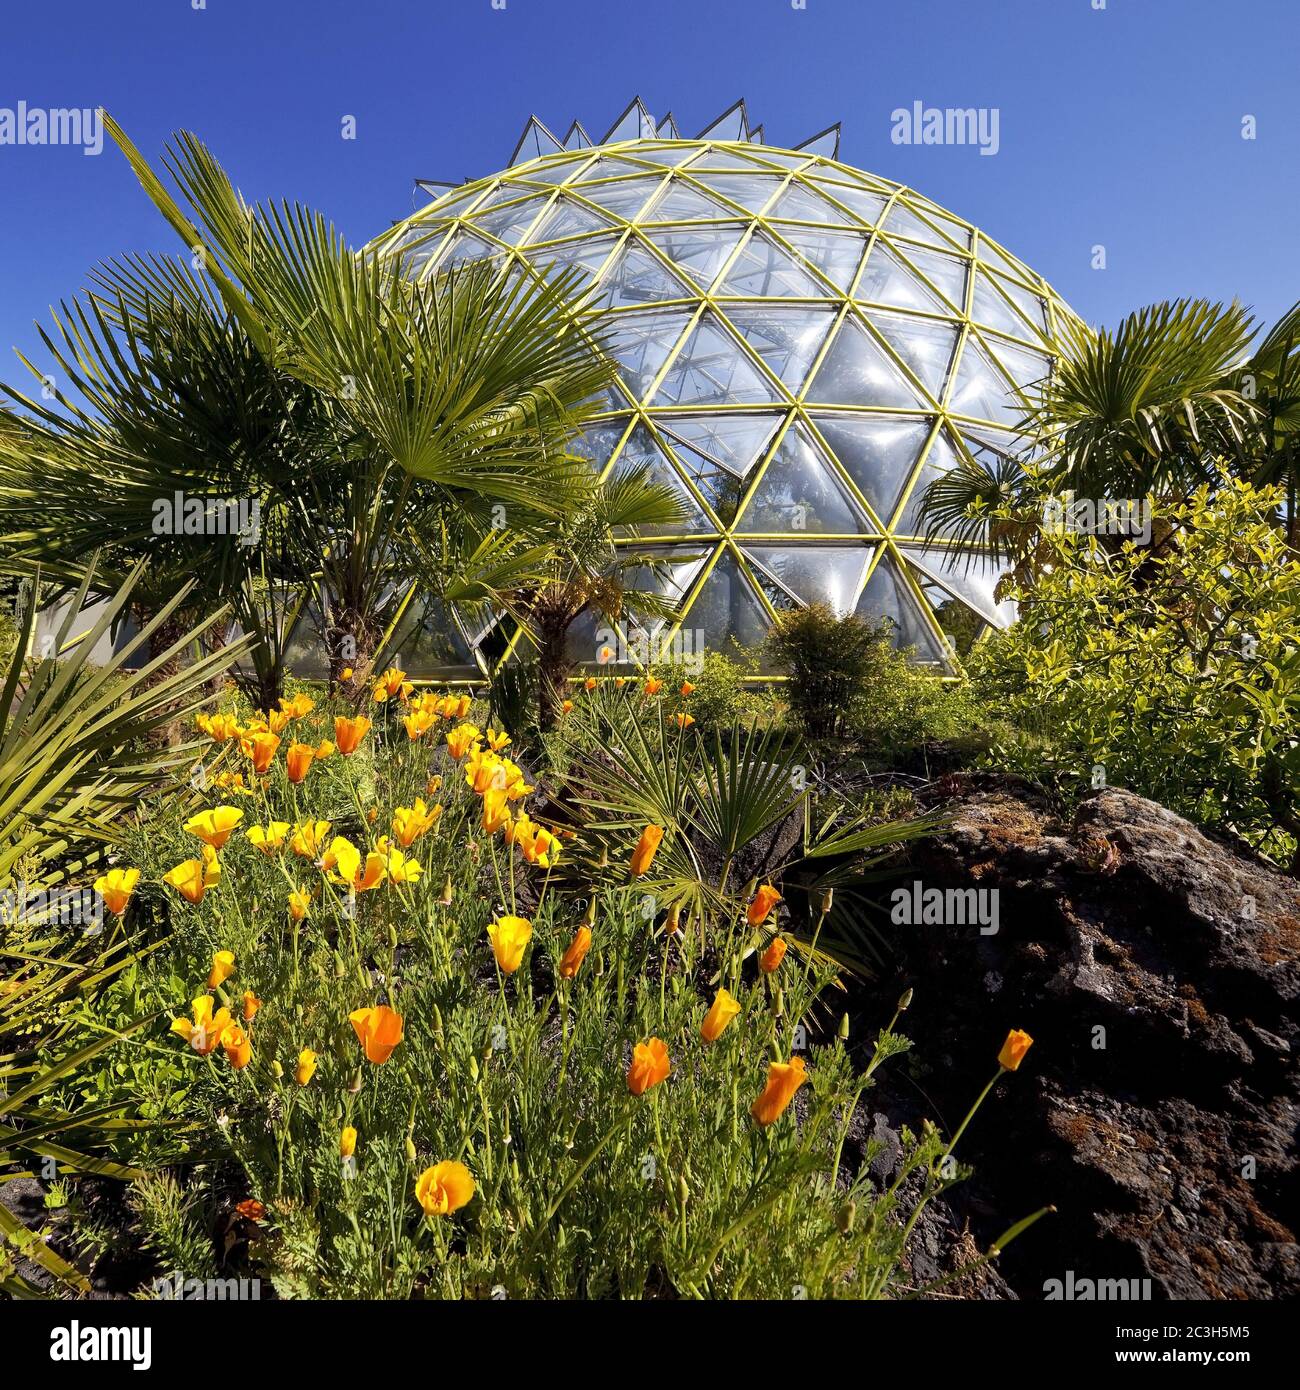 Botanical garden of the Heinrich Heine University with greenhouse dome,  Duesseldorf, Germany, Europe Stock Photo - Alamy